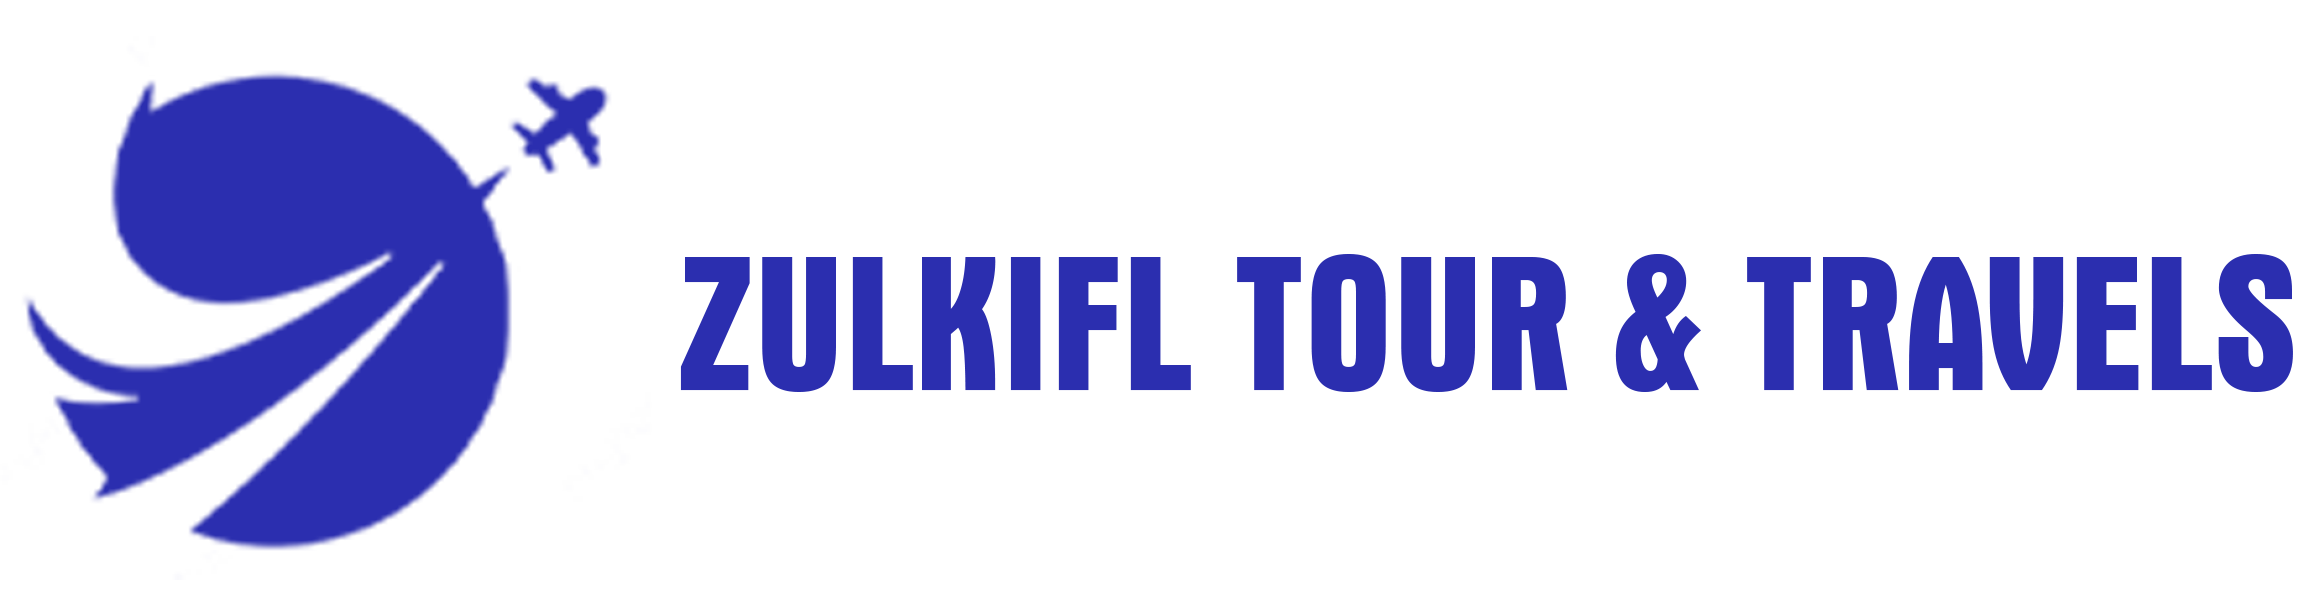 Zulkifl Tour & Travels - Leading the way in adventure